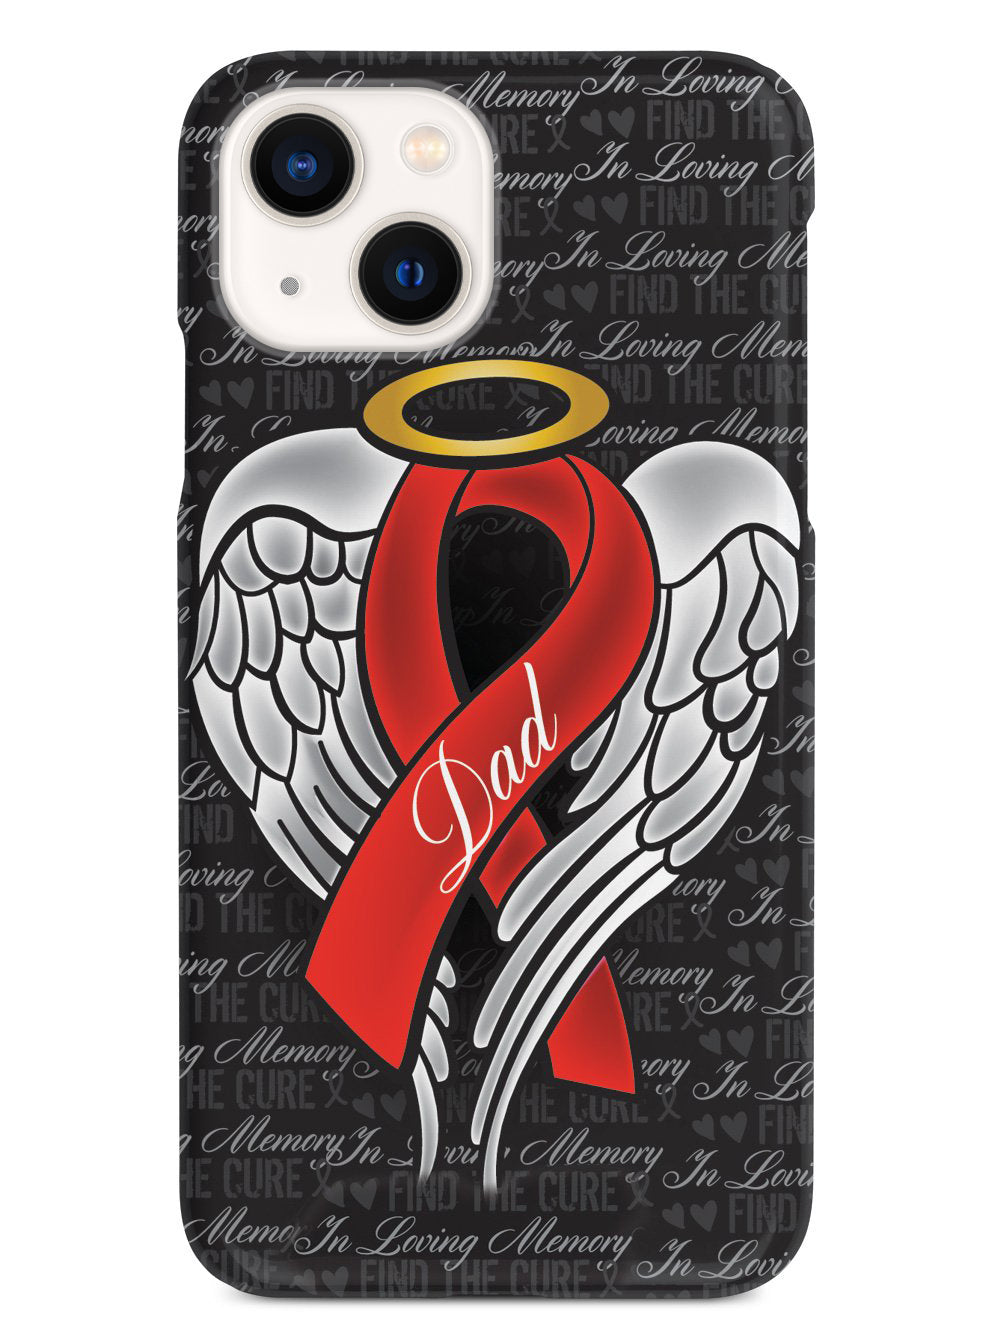 In Loving Memory of My Dad - Red Ribbon Case